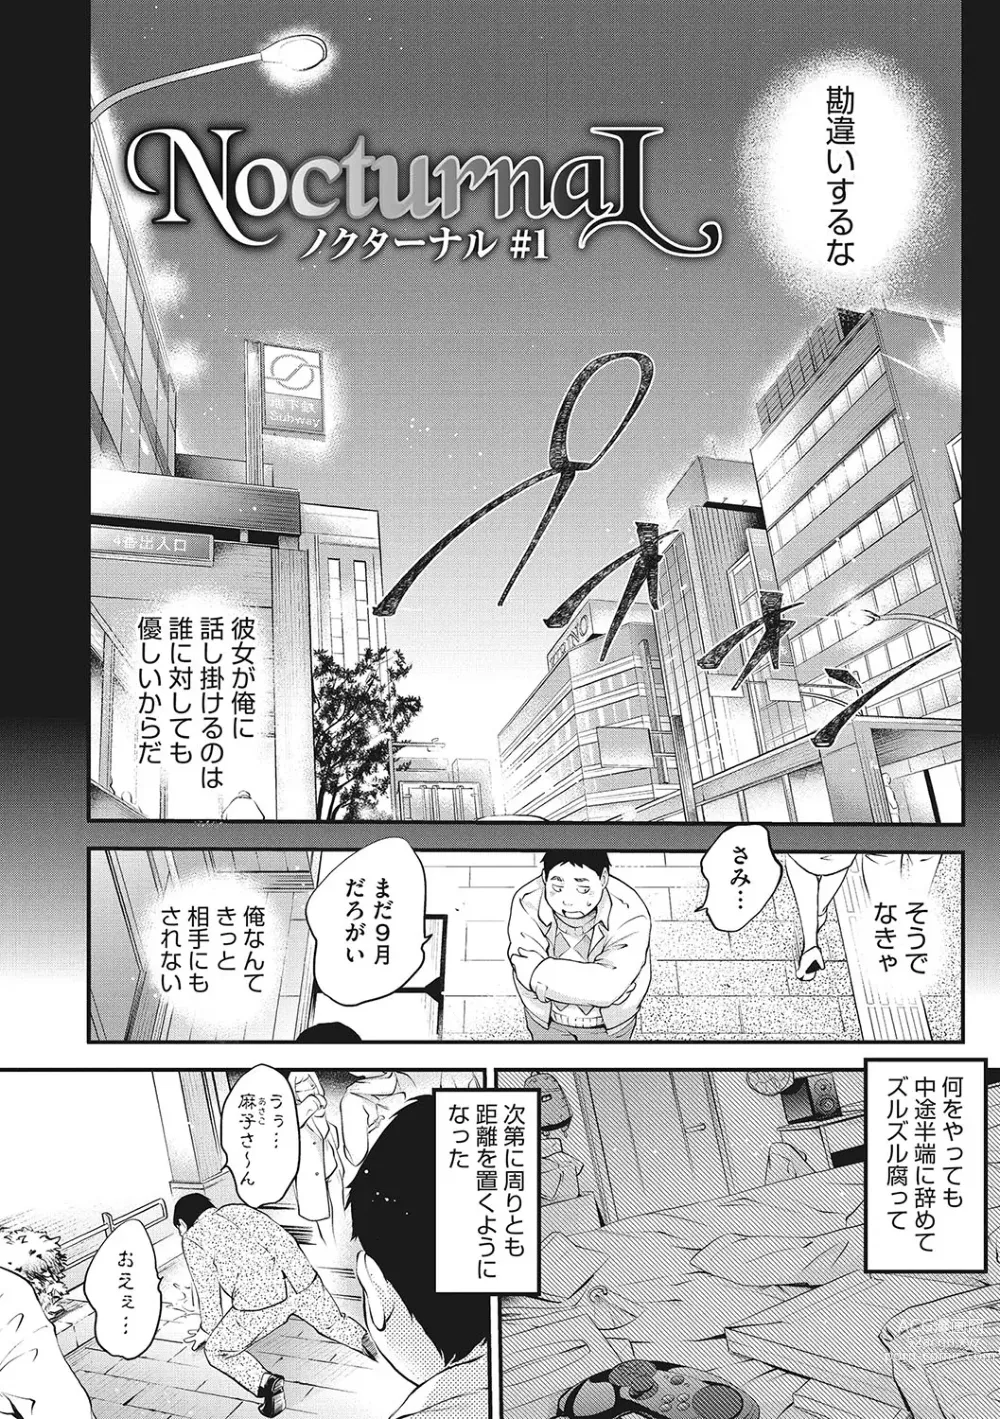 Page 5 of manga NocturnaL